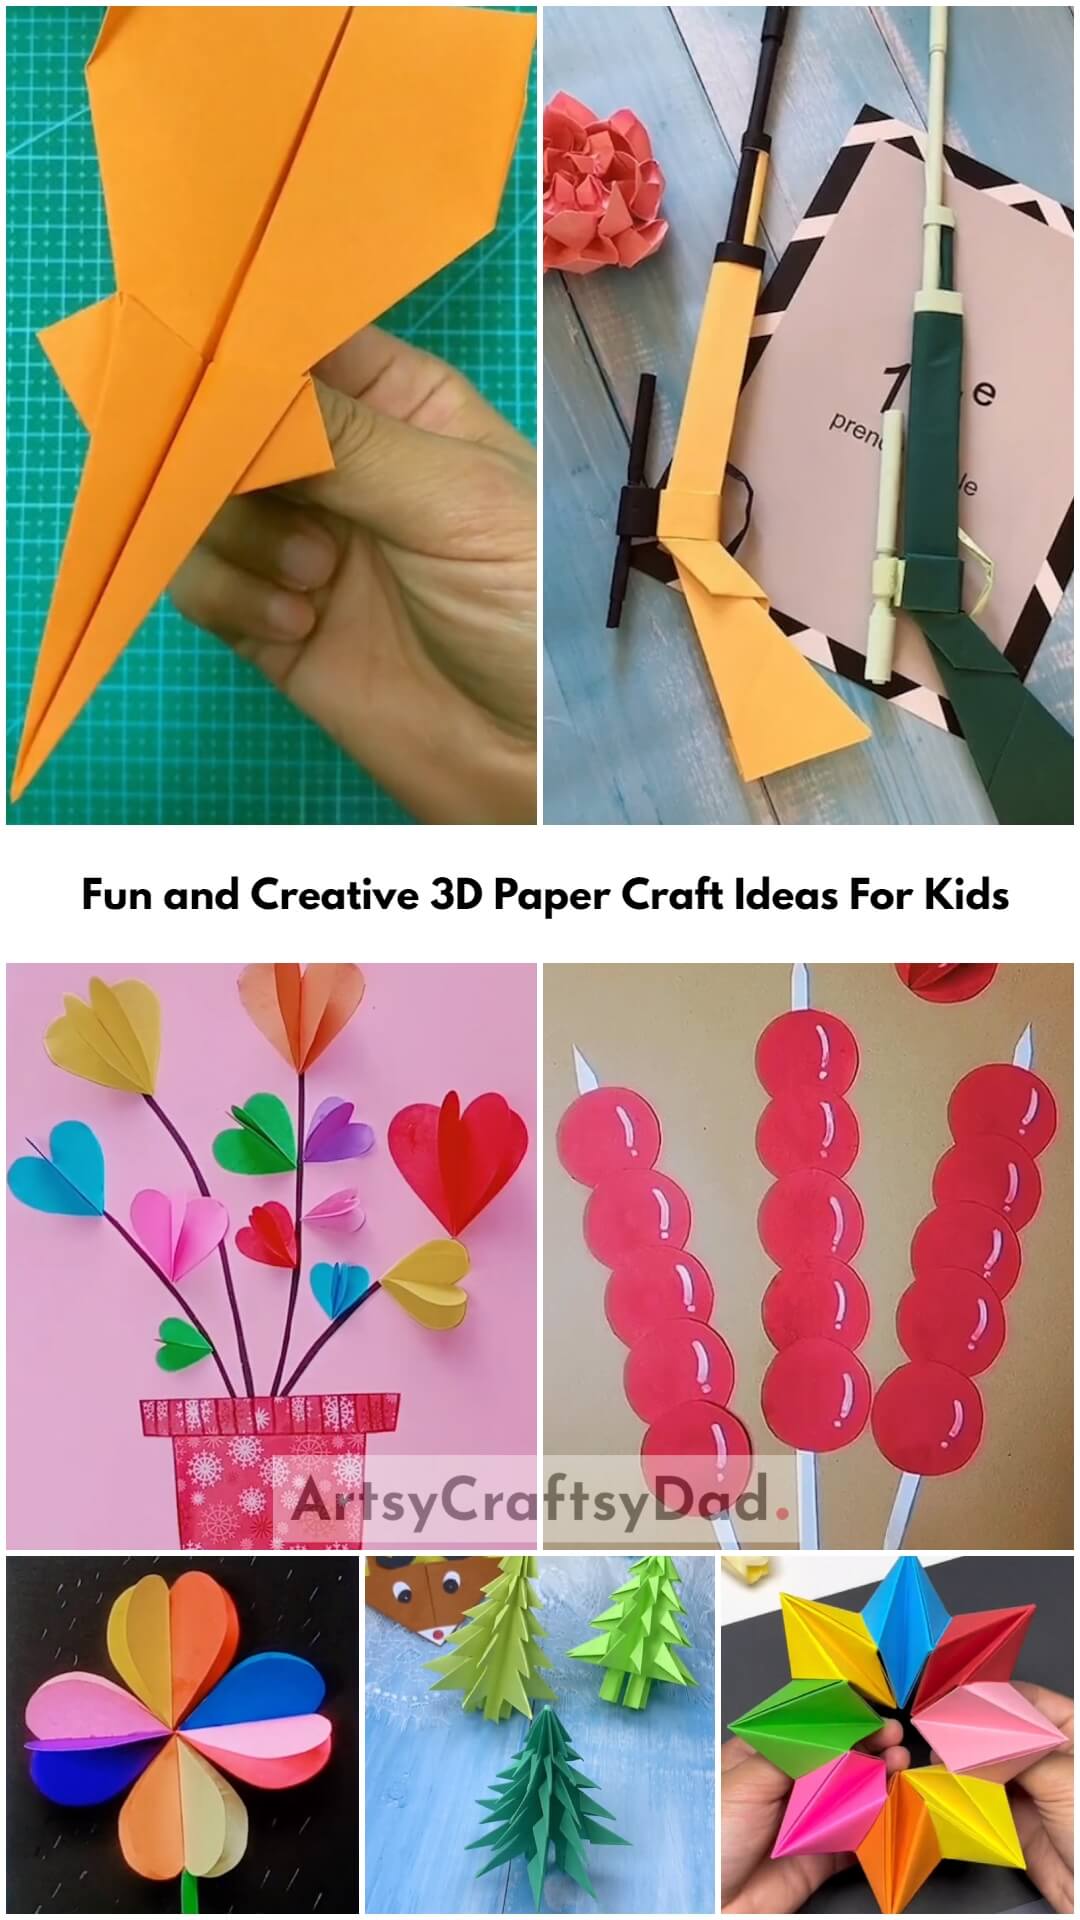 Fun and Creative 3D Paper Craft Ideas For Kids